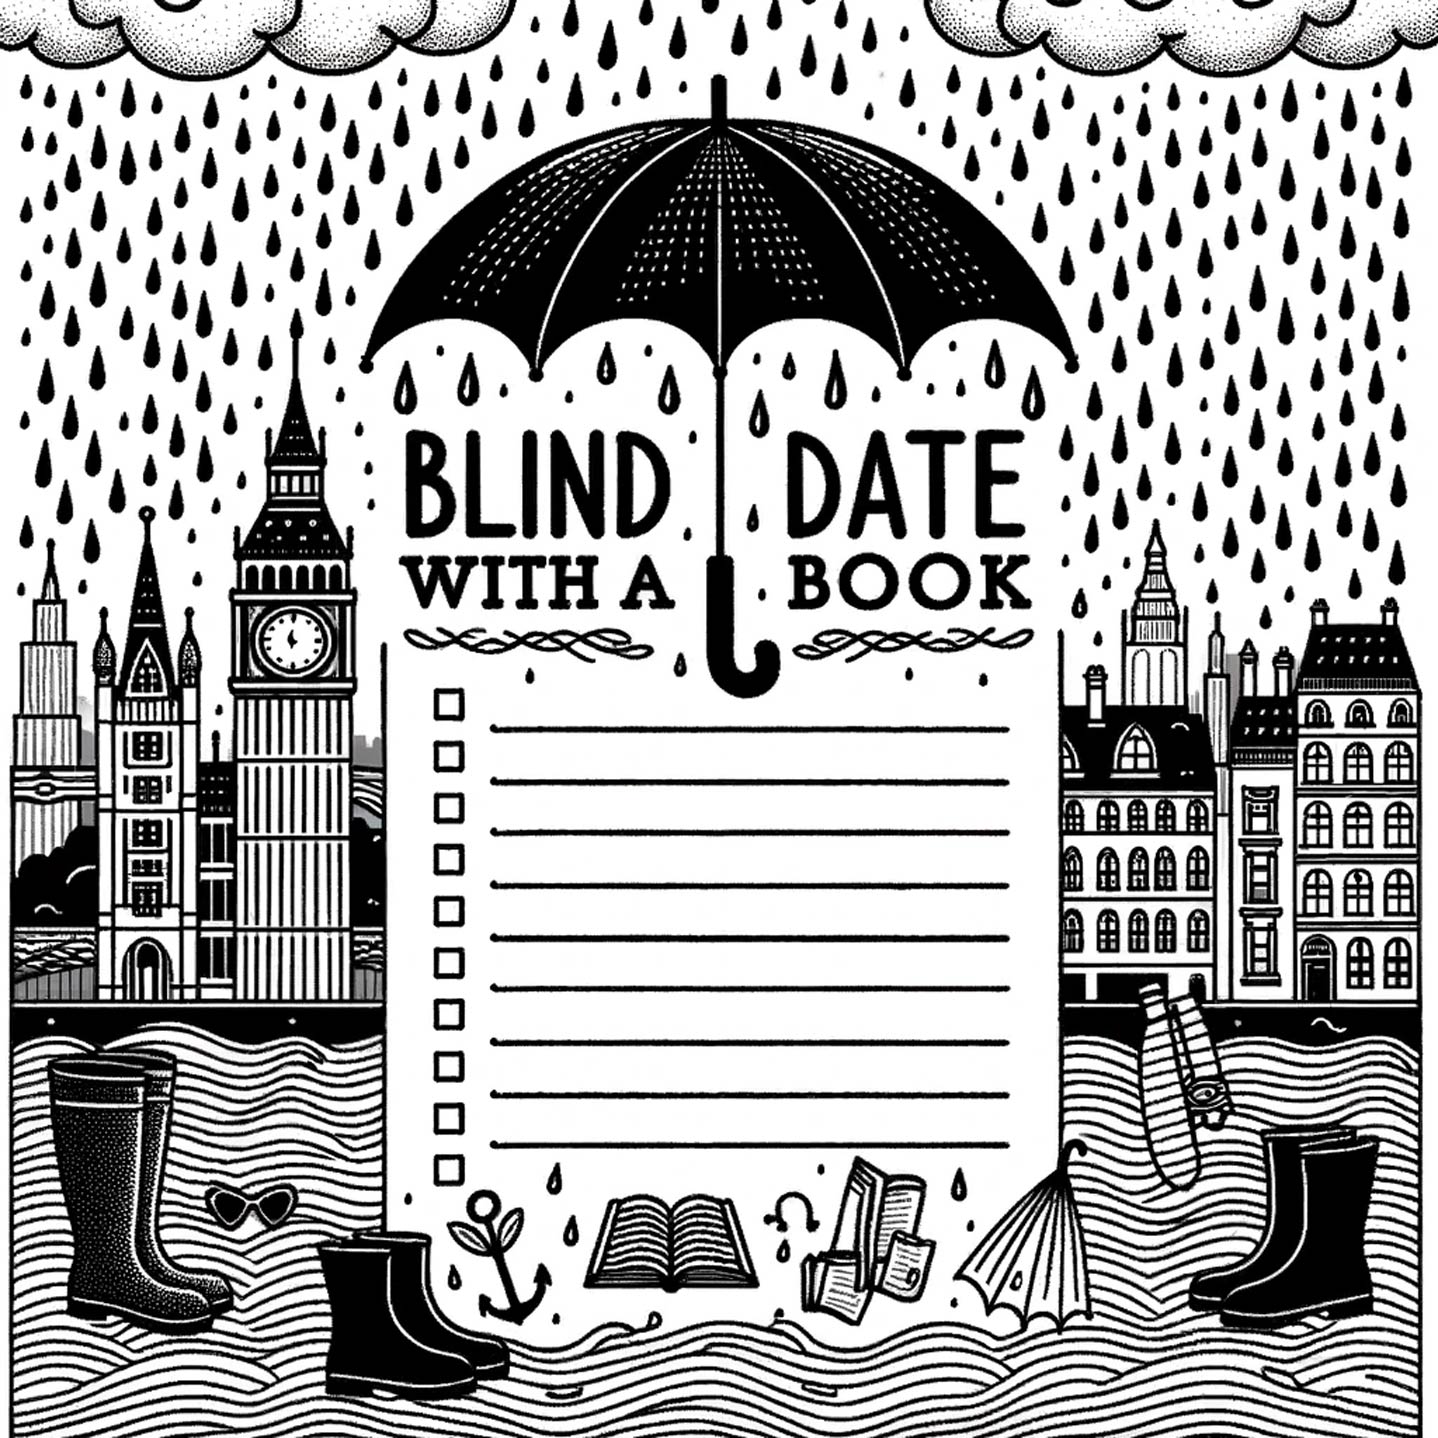 Blind Date With A Book Free Template - UK